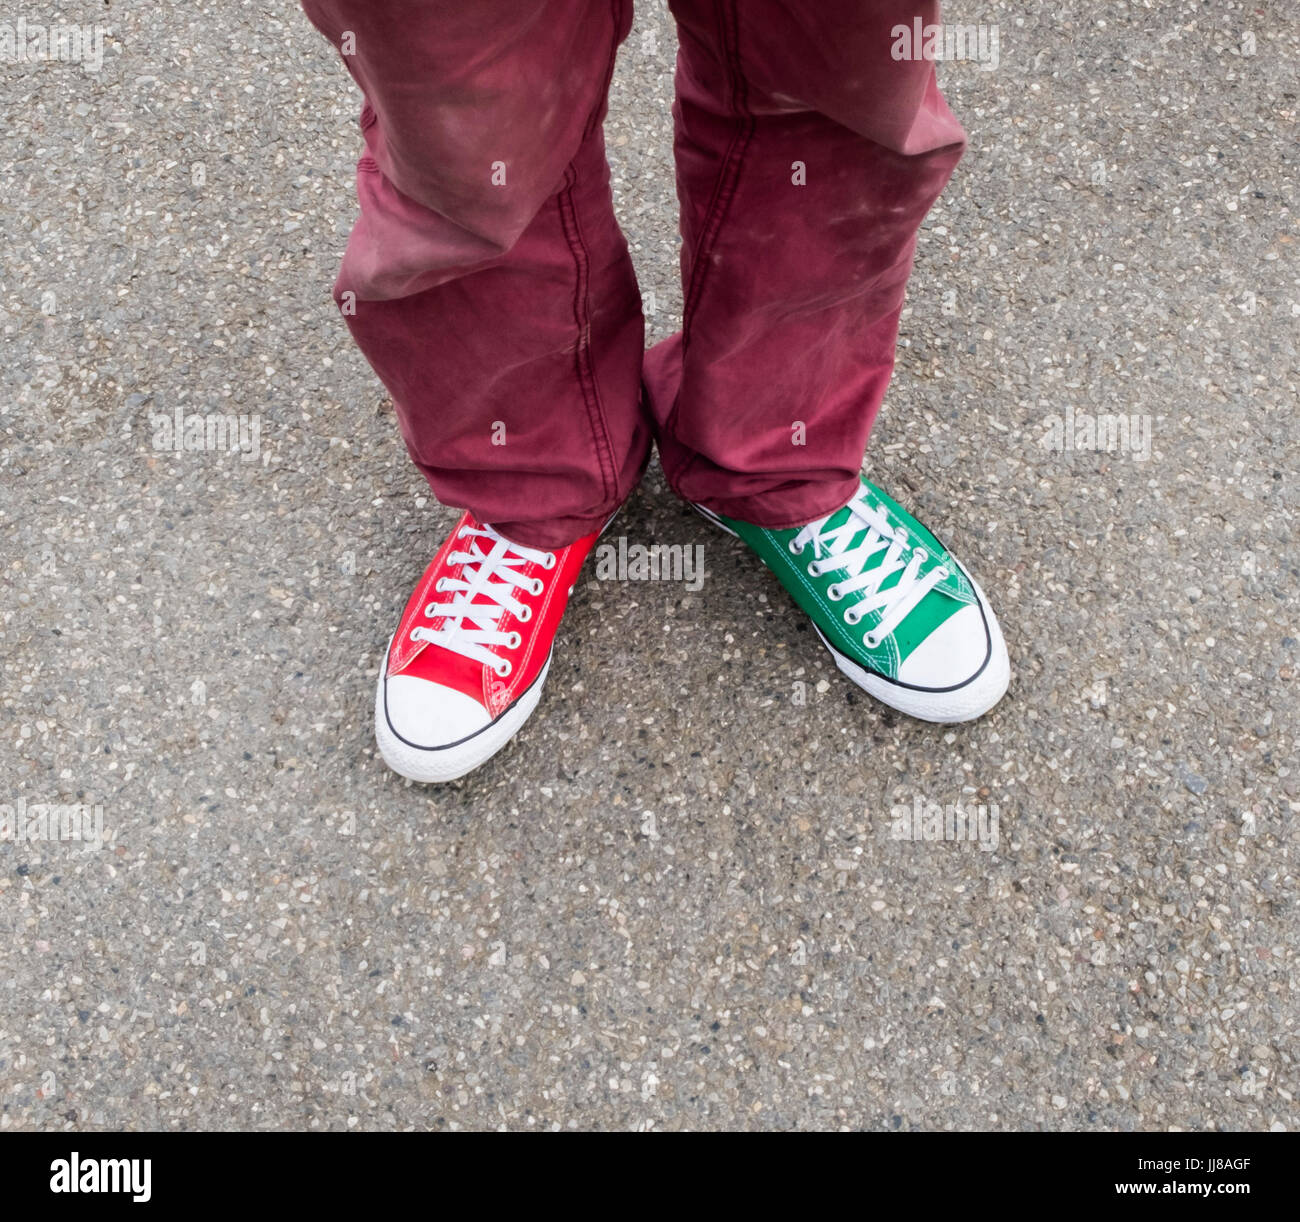 A man wearing brightly coloured plimsolls, pumps or trainers, one red and  one green, taken looking down on his feet Stock Photo - Alamy